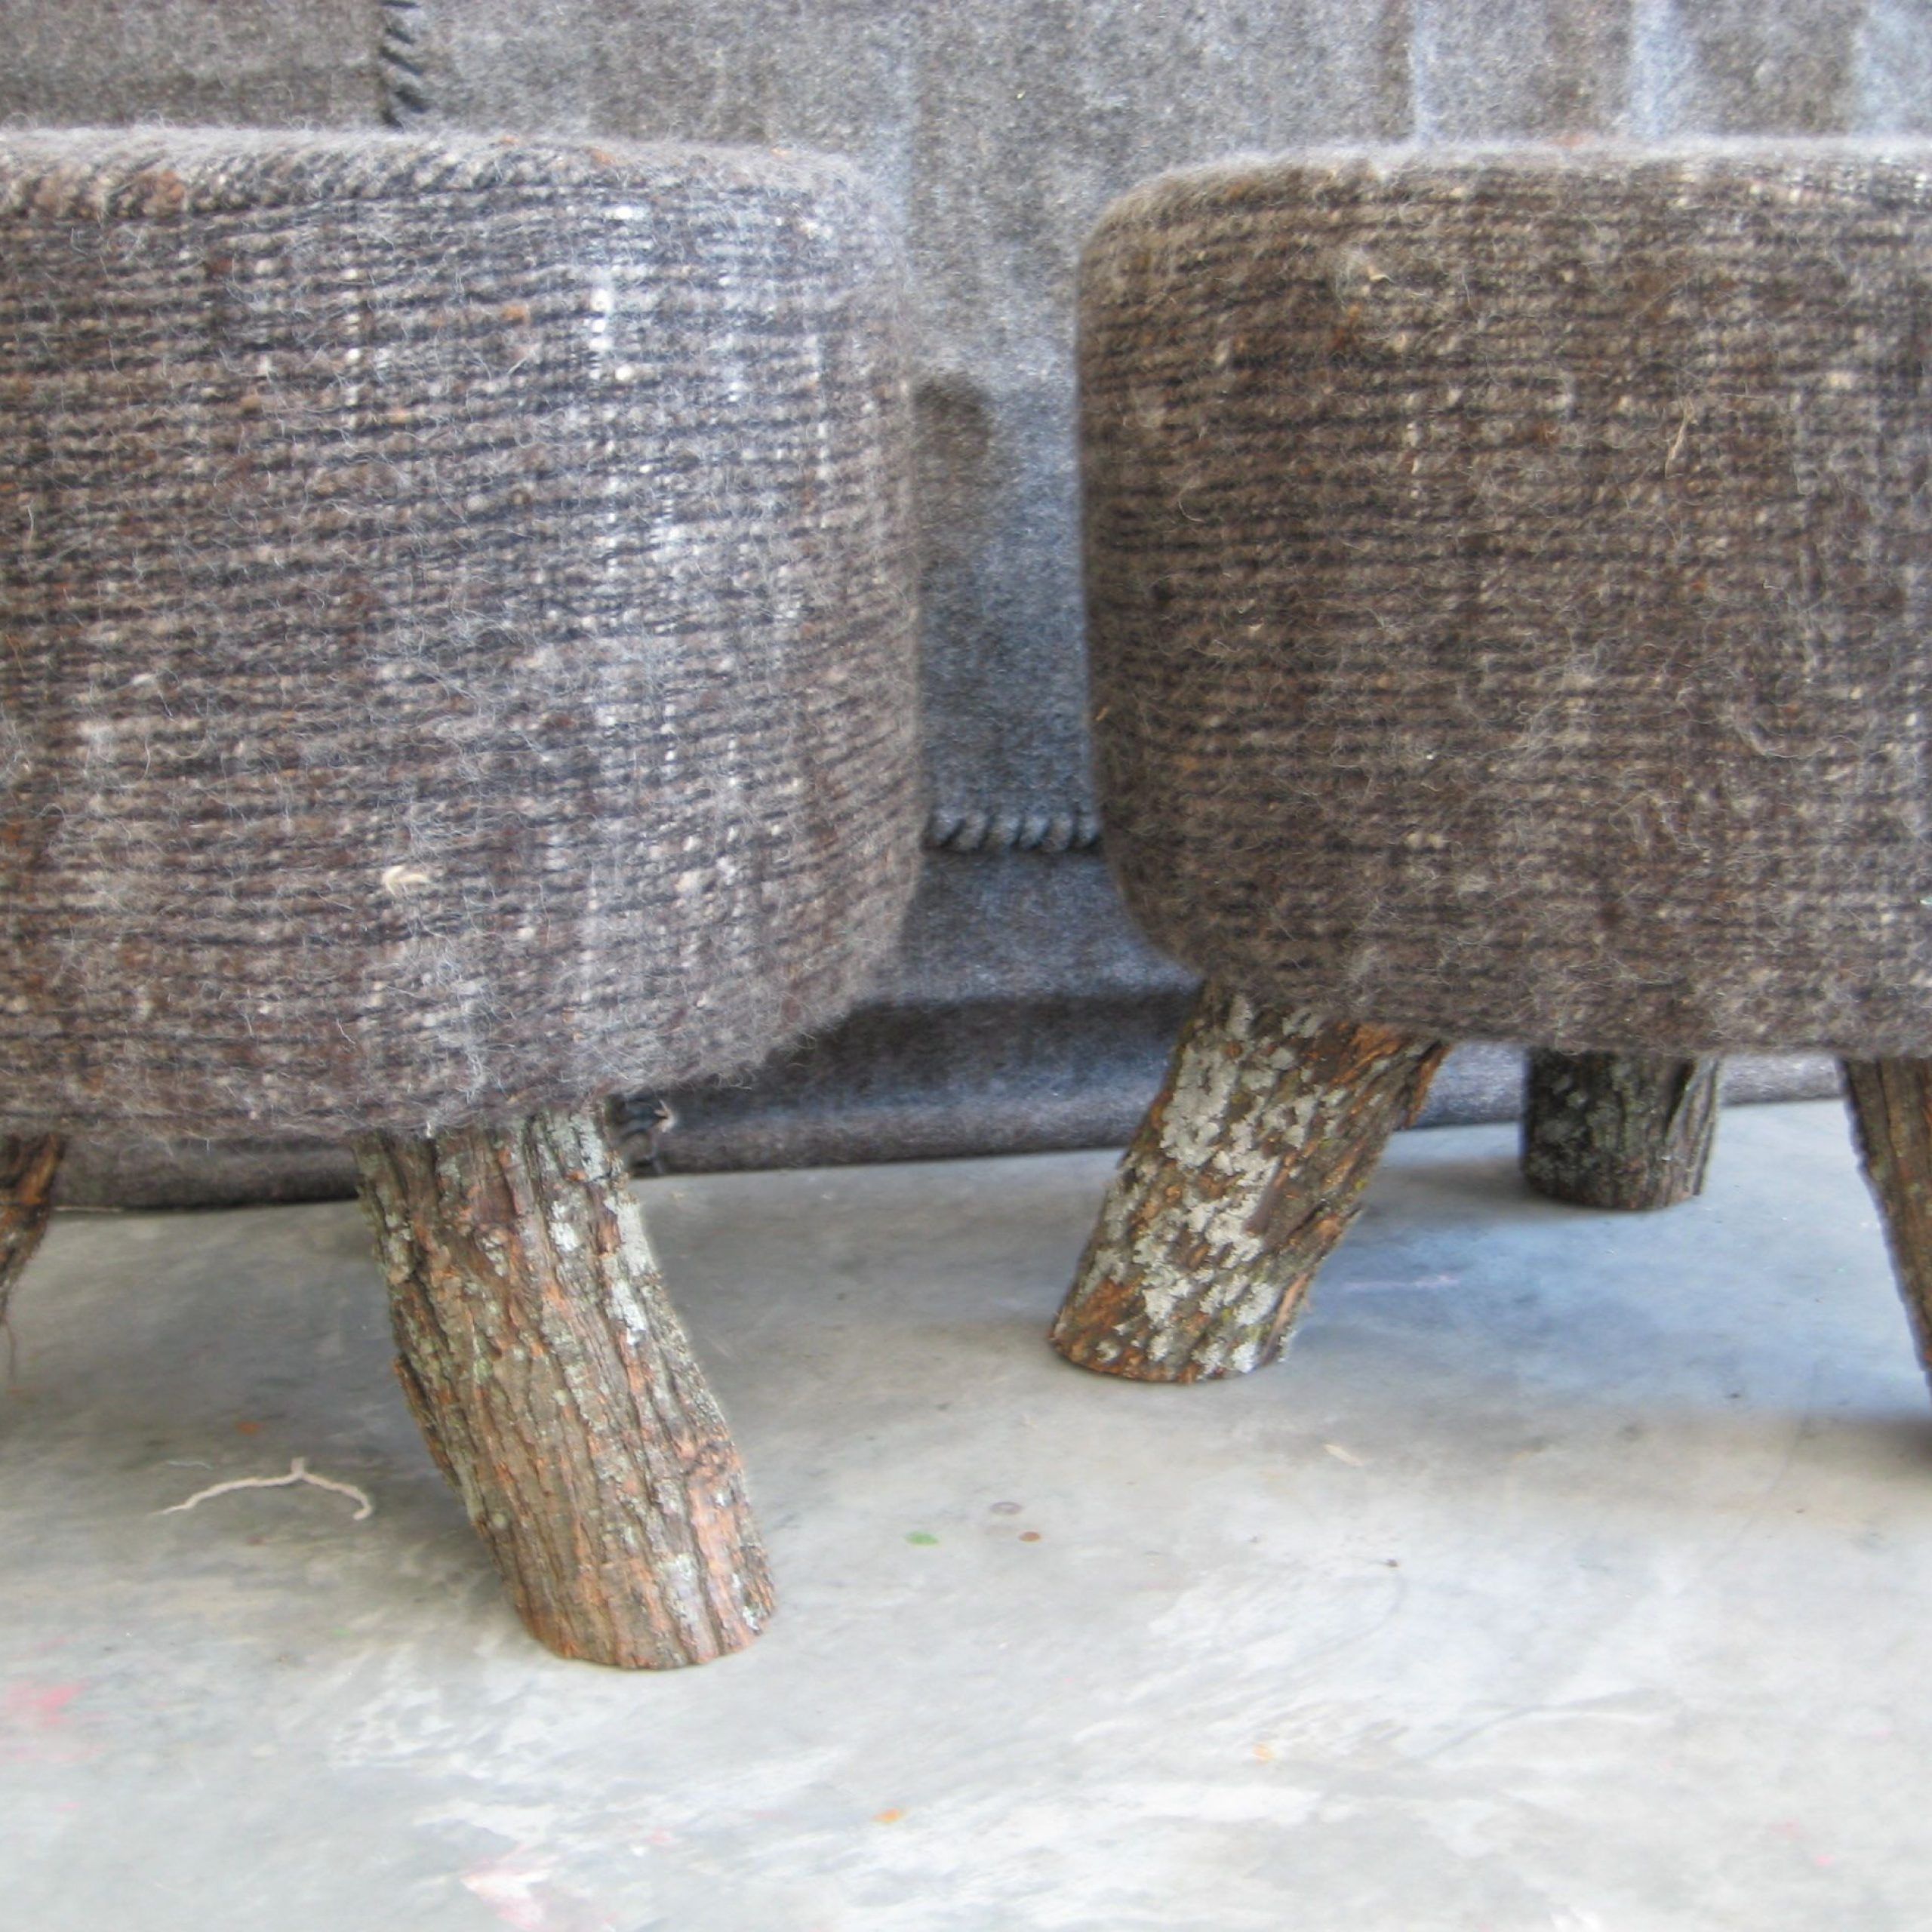 Carey Berkus Designs Mayan Wool Skirts Repurposed With Mesquite Legs Within Stone Wool With Wooden Legs Ottomans (View 11 of 20)